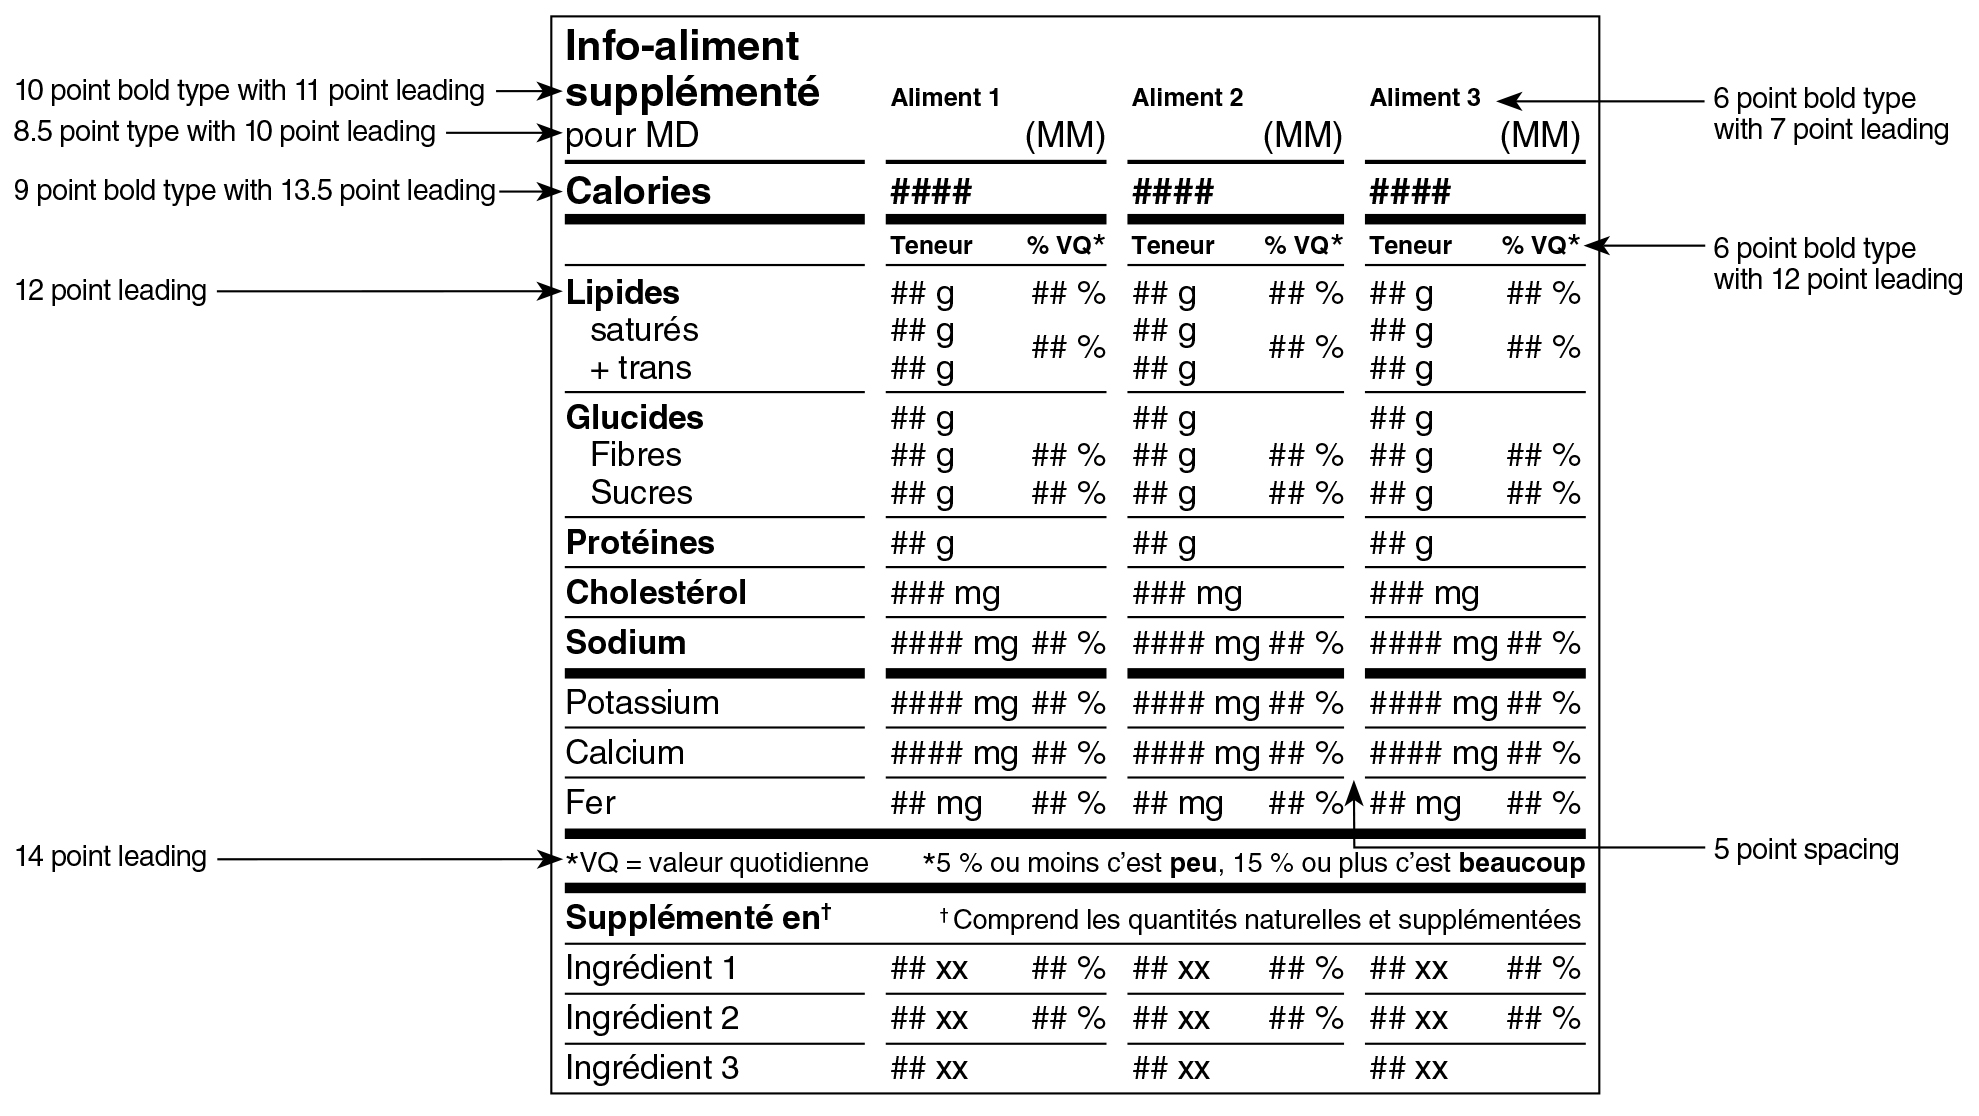 A French Supplemented Food Facts table in aggregate format for three different foods surrounded by specifications. Text version below.